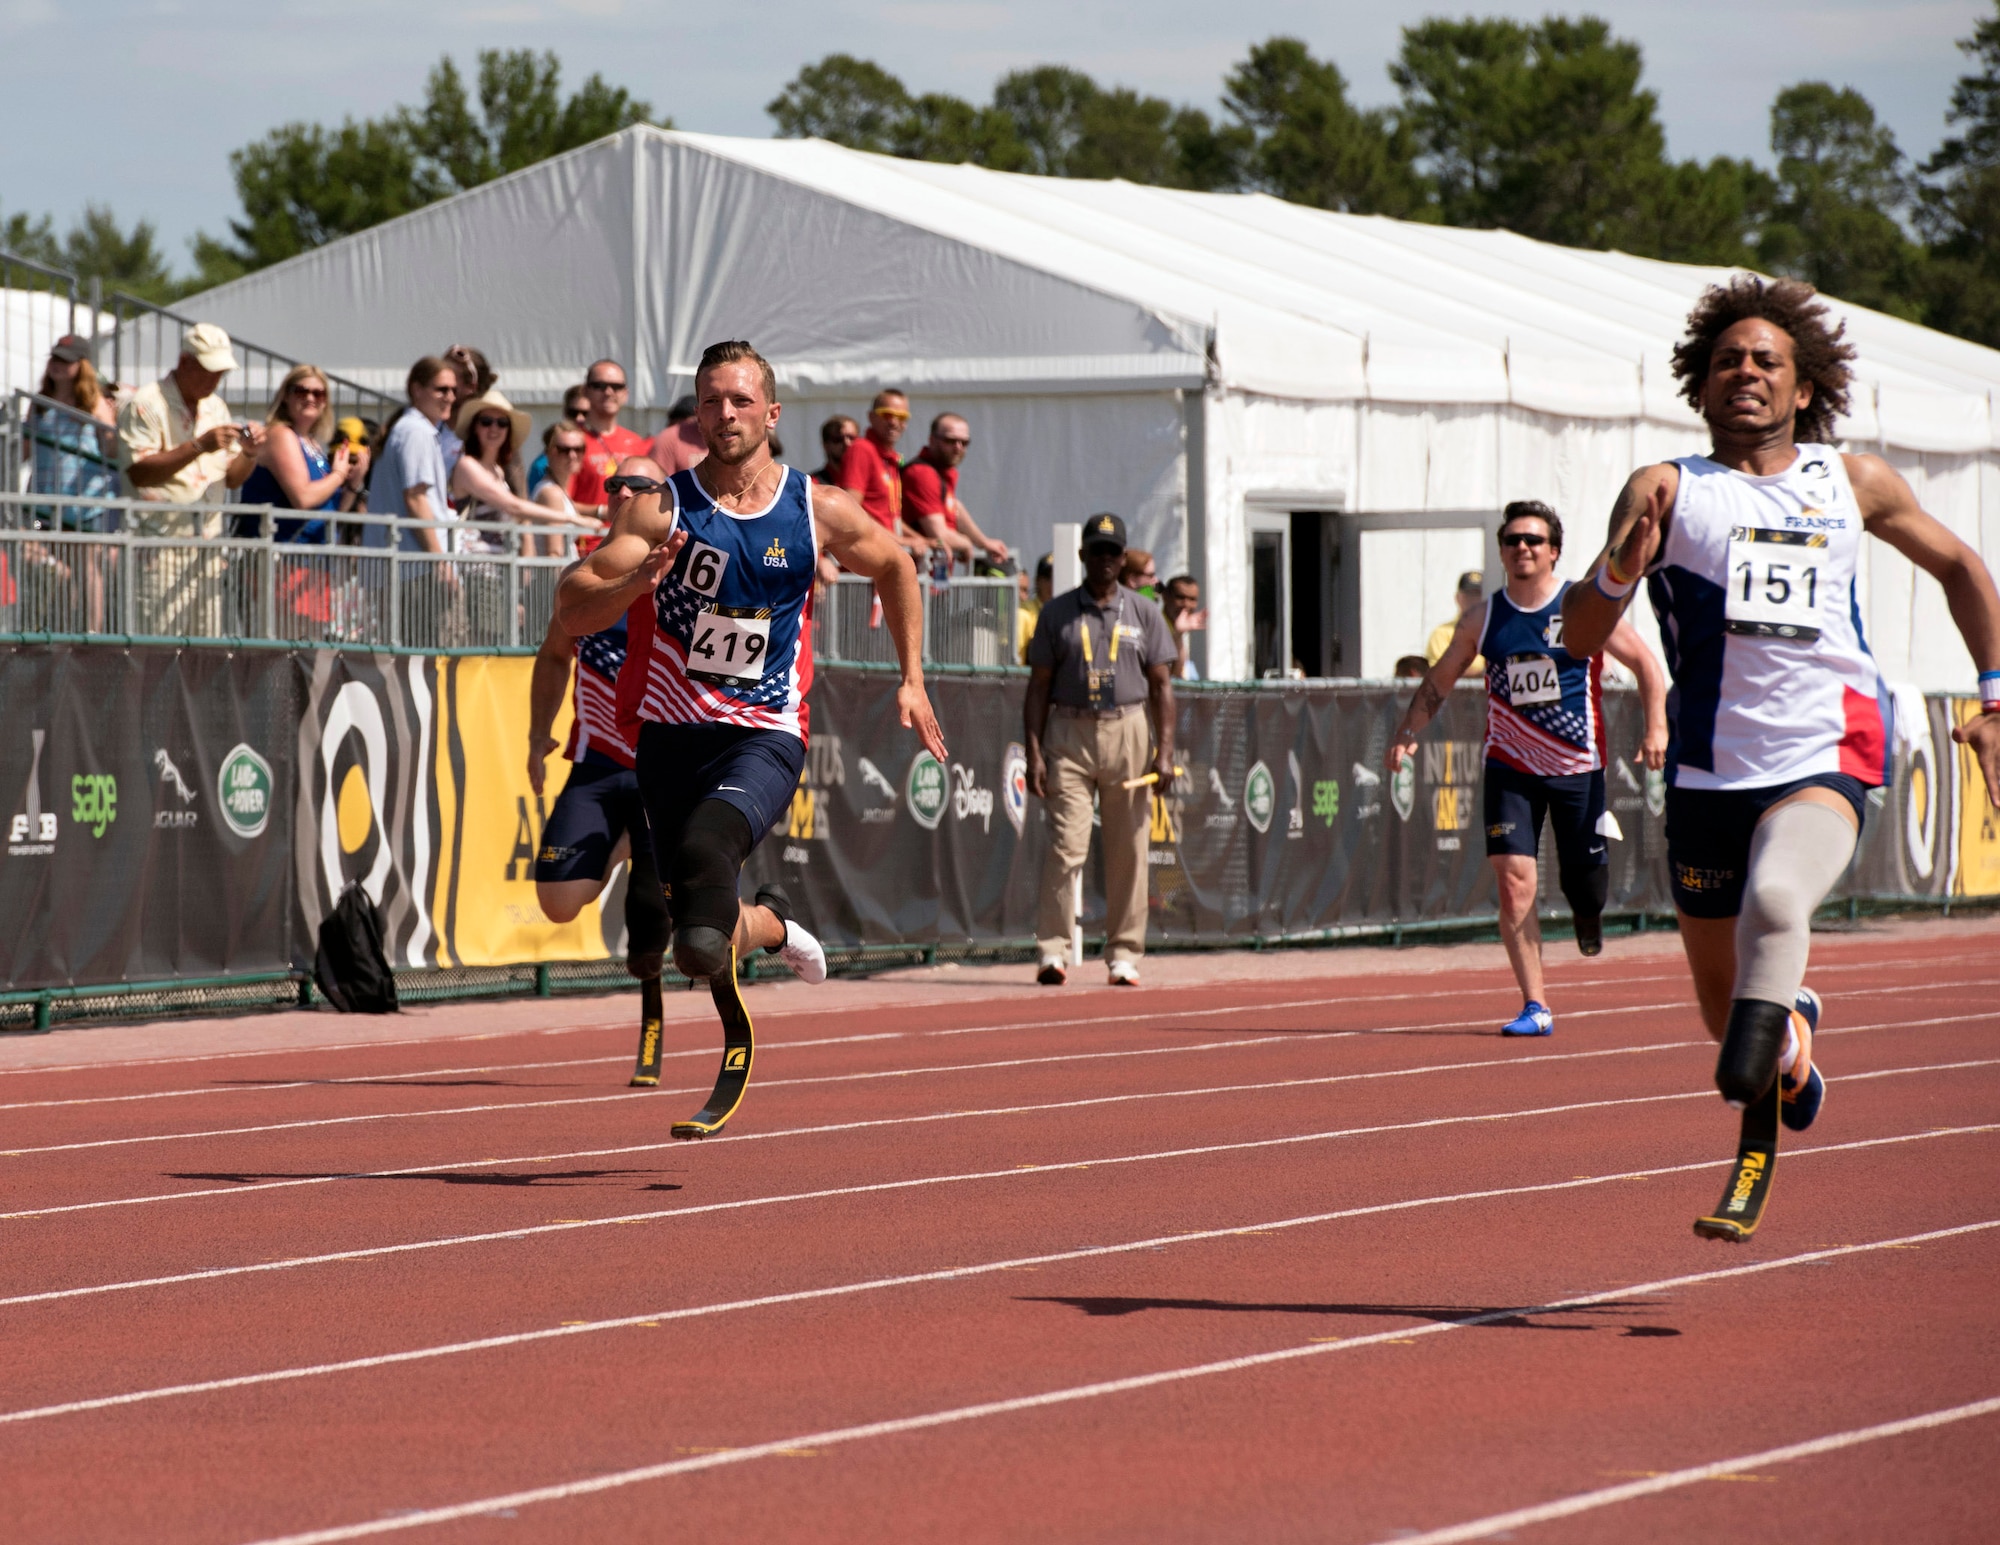 Staff Sgt. Gideon Connelly, left, and France's Michael Mayali sprint during the men's 200-meter dash at the Invictus Games at the ESPN Wide World of Sports Complex in Orlando, Fla., May 10, 2016. Mayali earned the silver medal, and Connelly, a member of the Maryland Air National Guard, took the bronze medal. (Defense Department photo/Roger Wollenberg)  